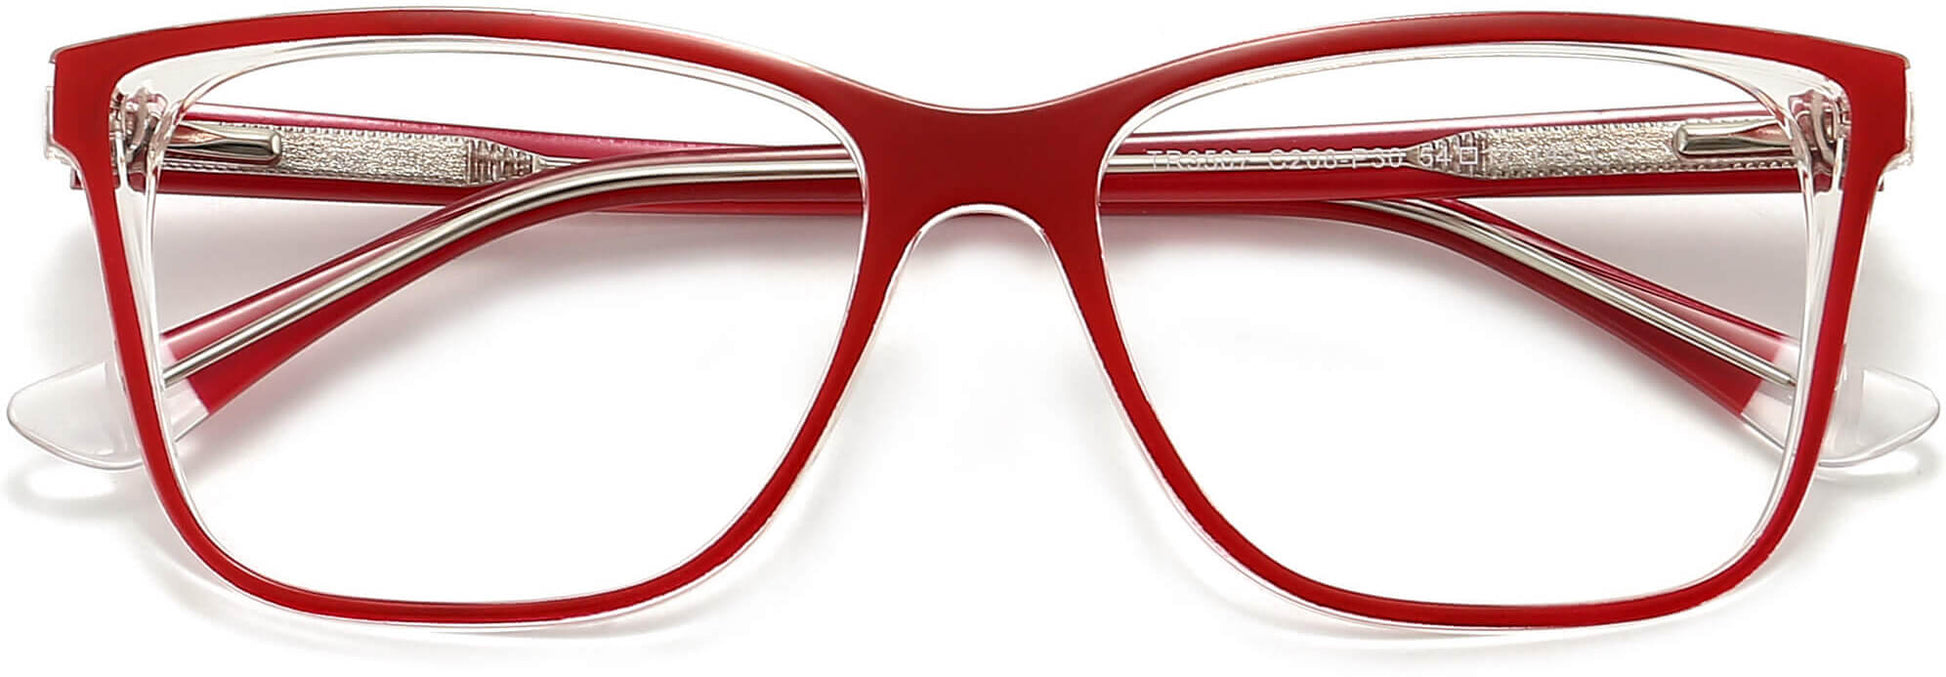 Tracy Cateye Red Eyeglasses from ANRRI, closed view